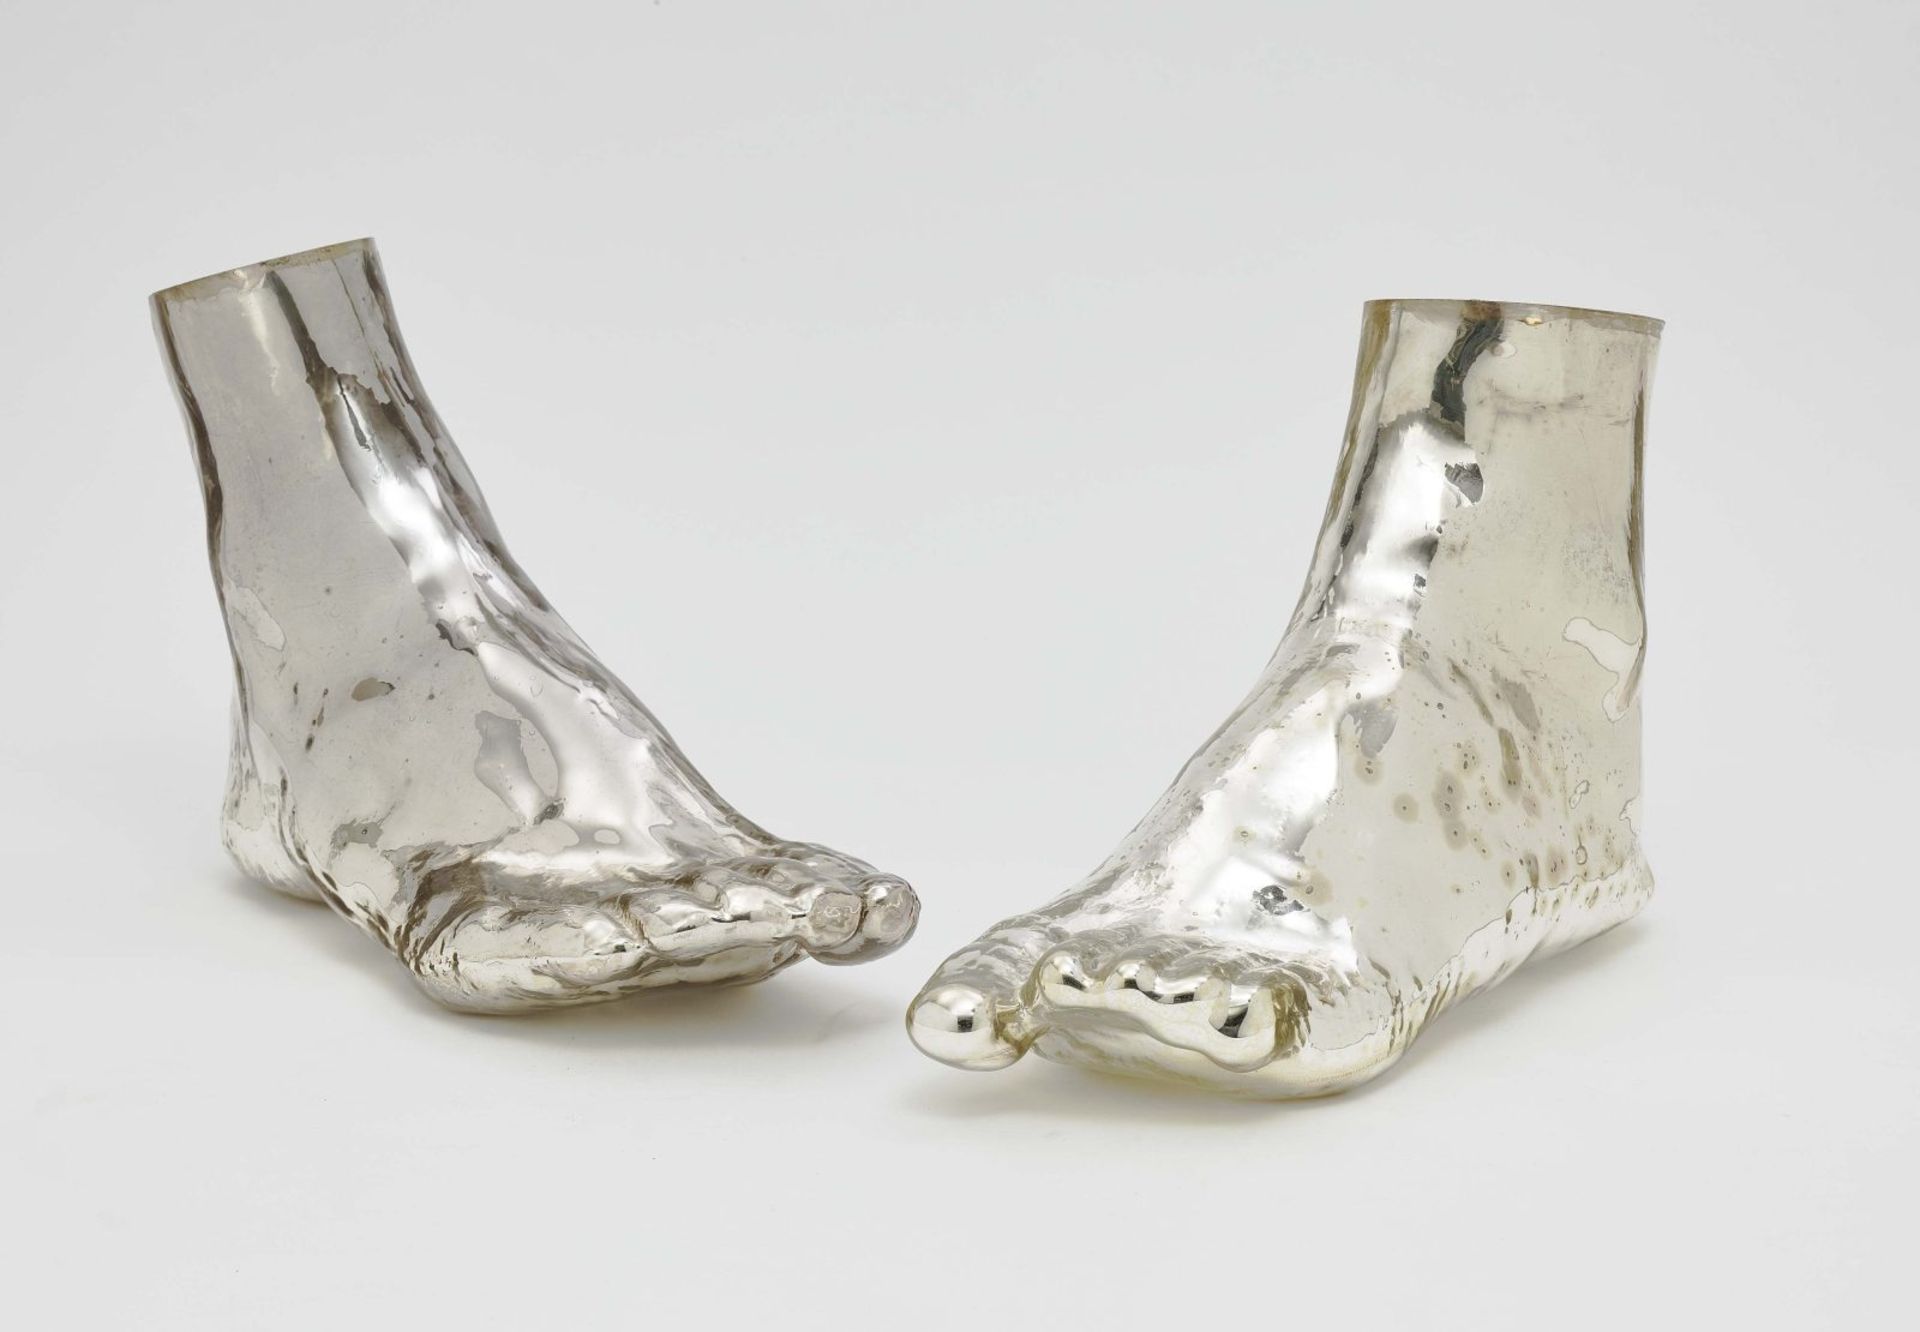 Wynne, RobFeet. 1998 Hand-blown glass, mirrored with steam (Unique) approximately 18.5 x 26 x 10